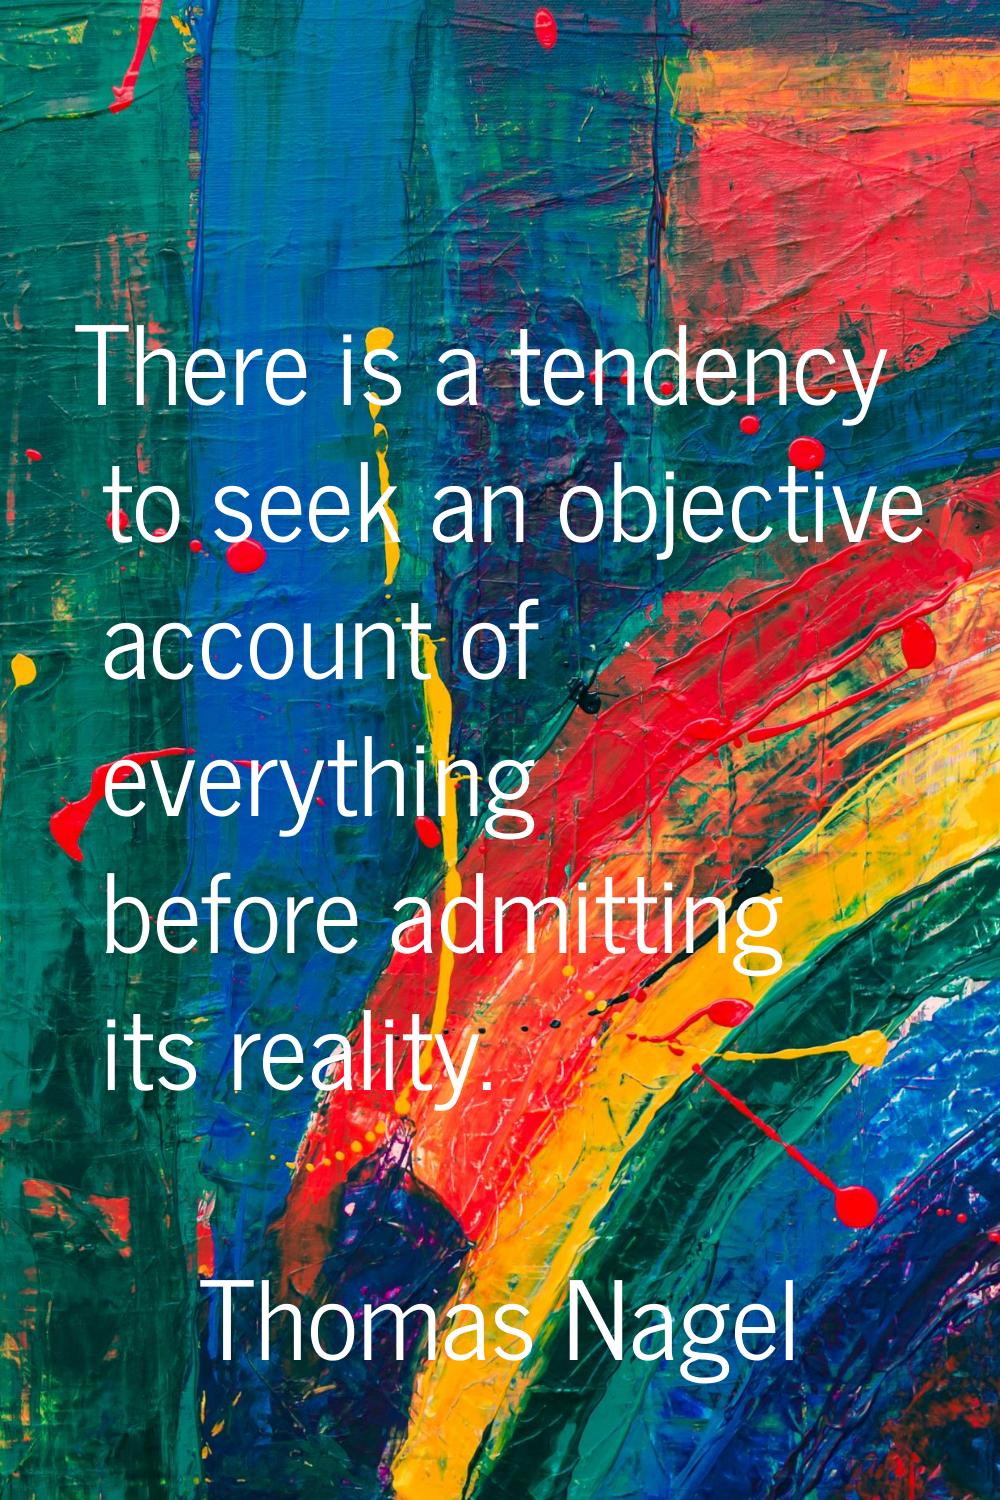 There is a tendency to seek an objective account of everything before admitting its reality.